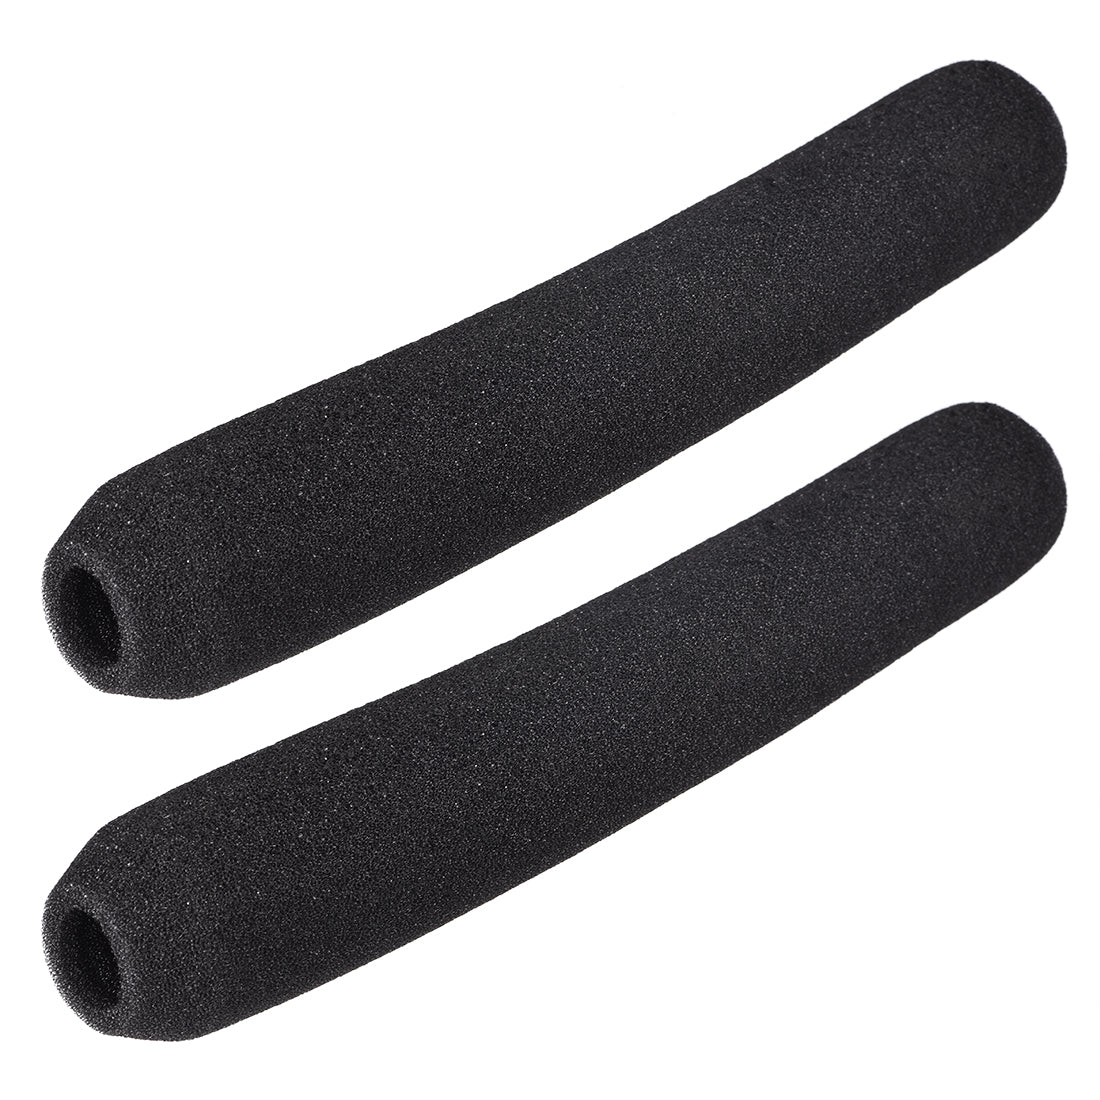 uxcell Uxcell 2PCS Sponge Foam Mic Cover Interview Microphone Windscreen Shield Protection Black 248mm Long